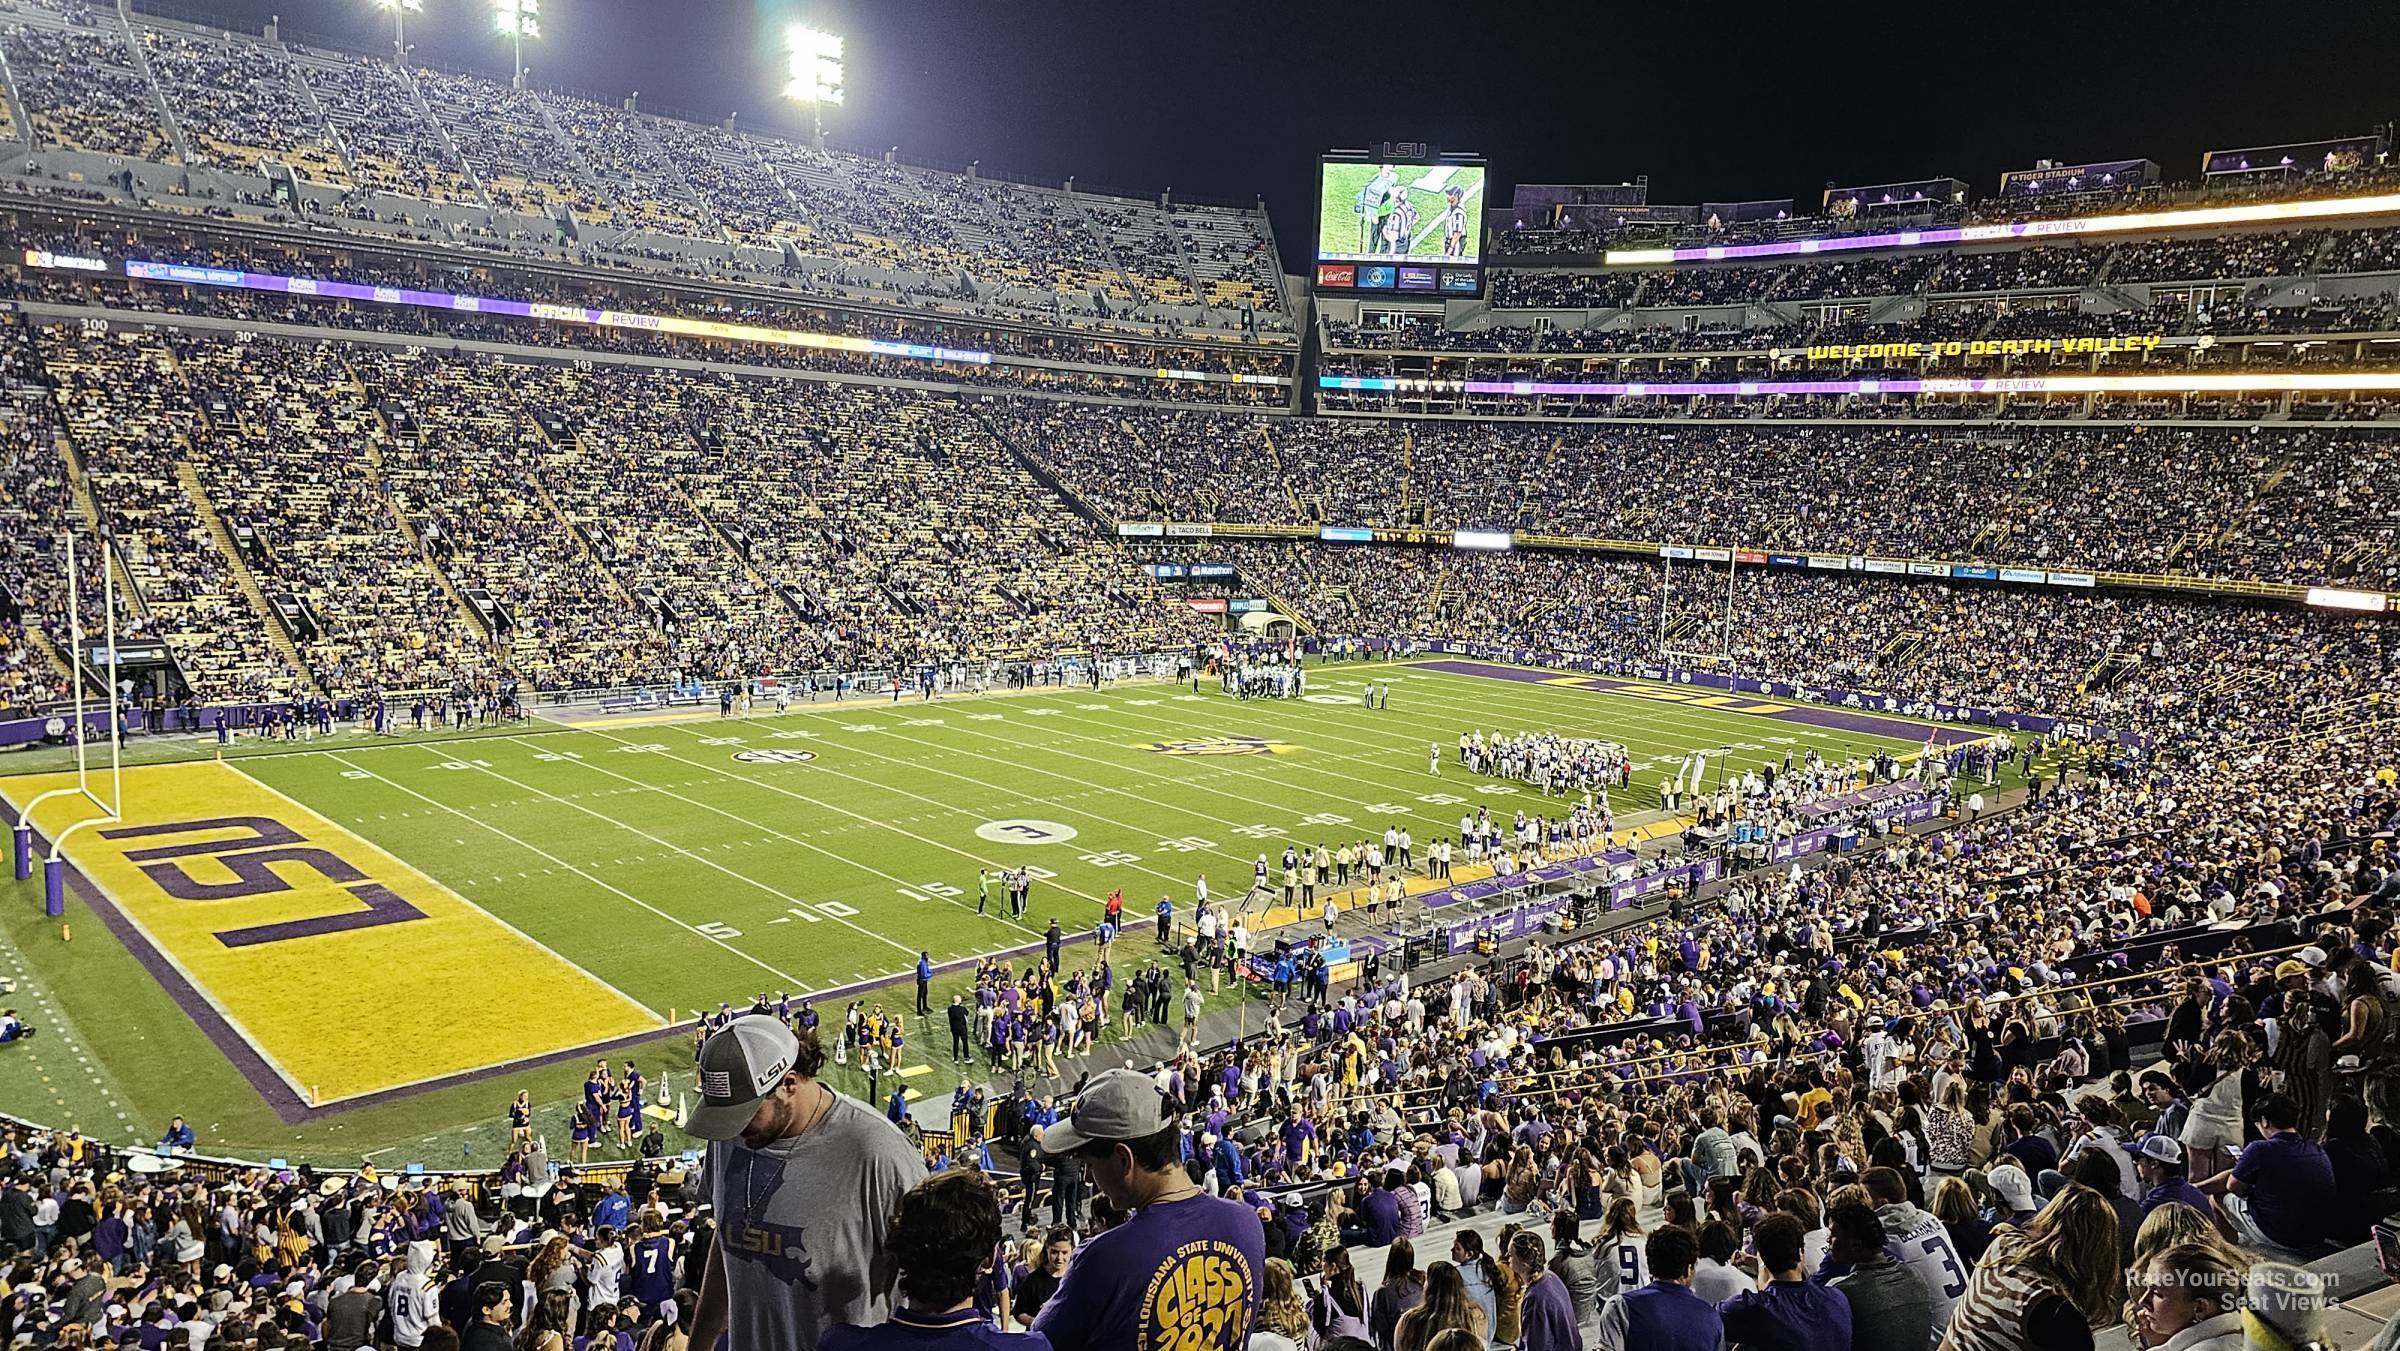 section 224, row 1 seat view  - tiger stadium